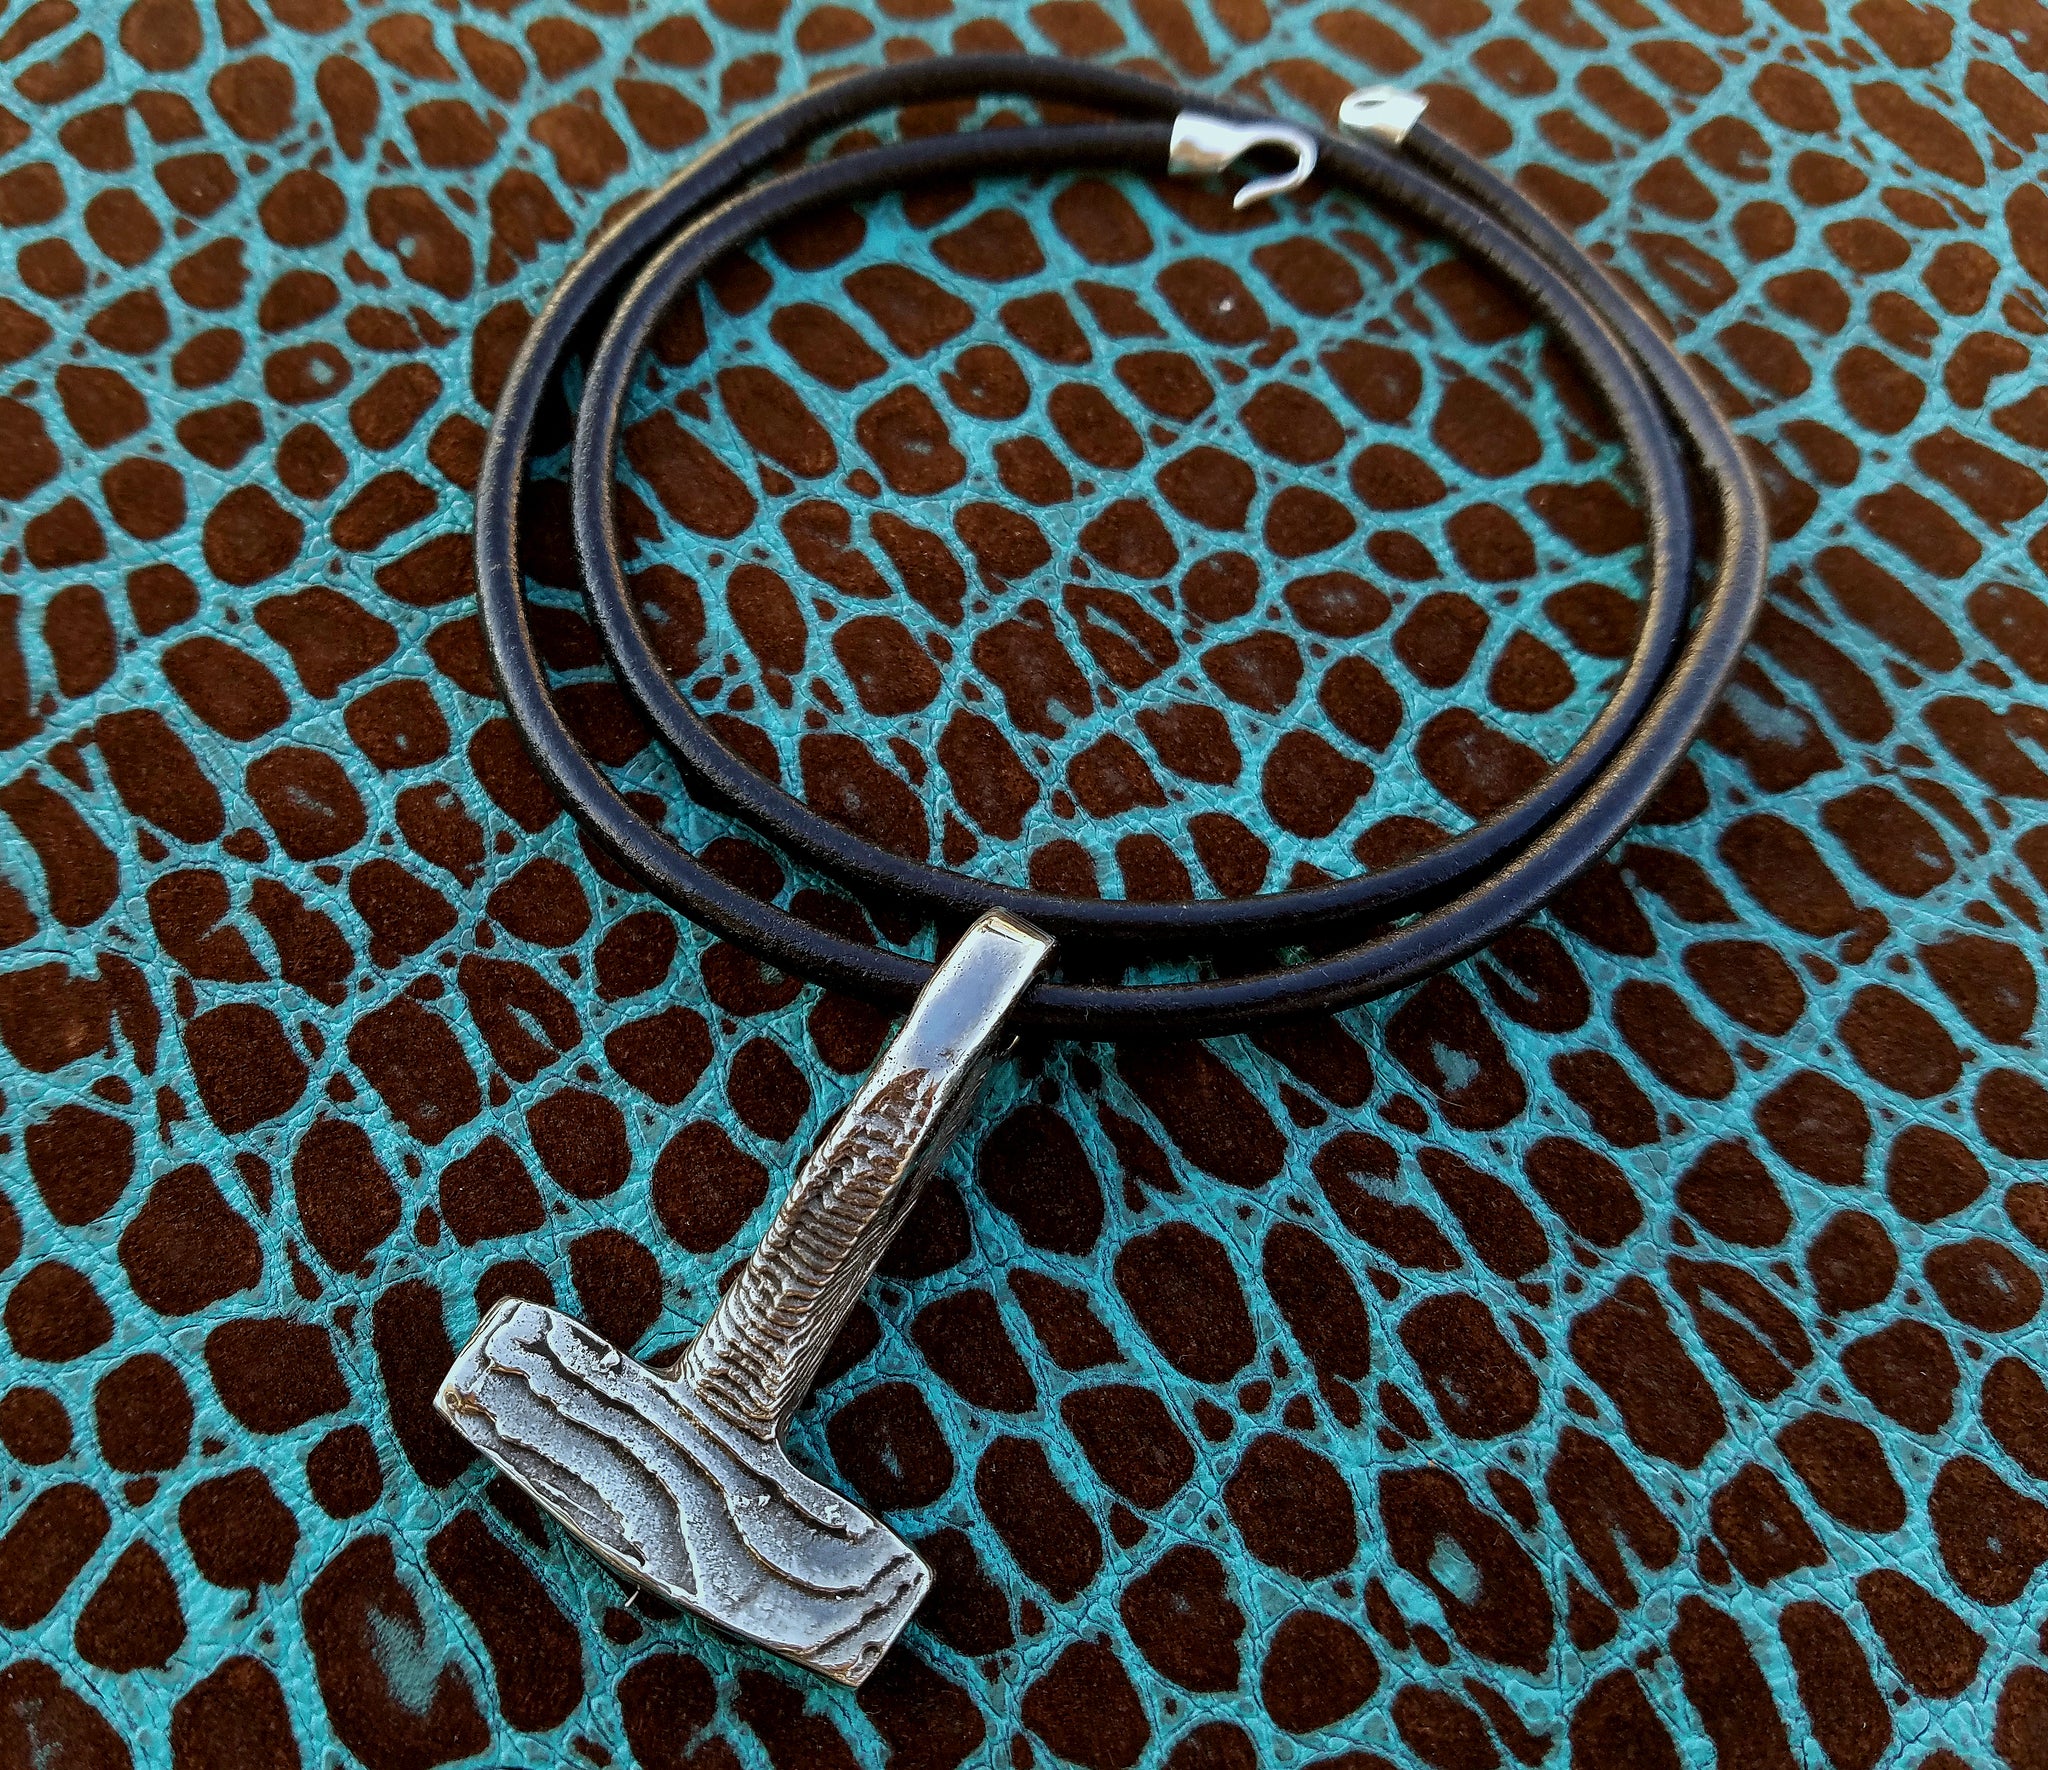 'Thor's Hammer' Hand-carved Hand-poured Cuttlefish Pendant #1 by Phantom